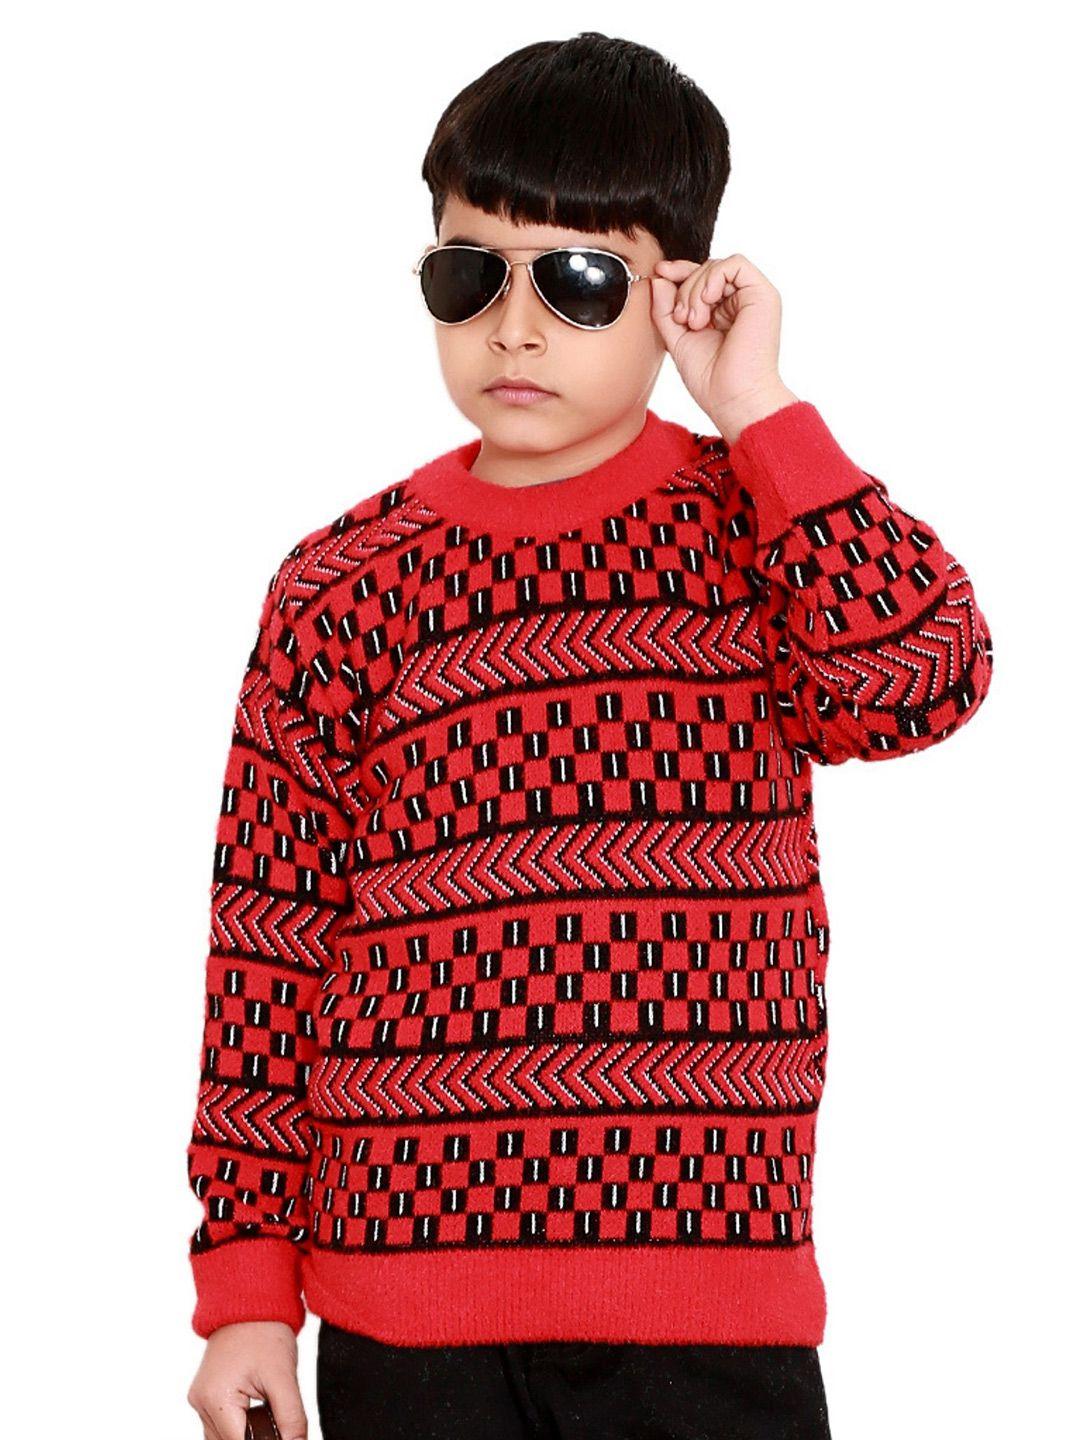 baesd-boys-geometric-printed-round-neck-long-sleeves-acrylic-pullover-sweater